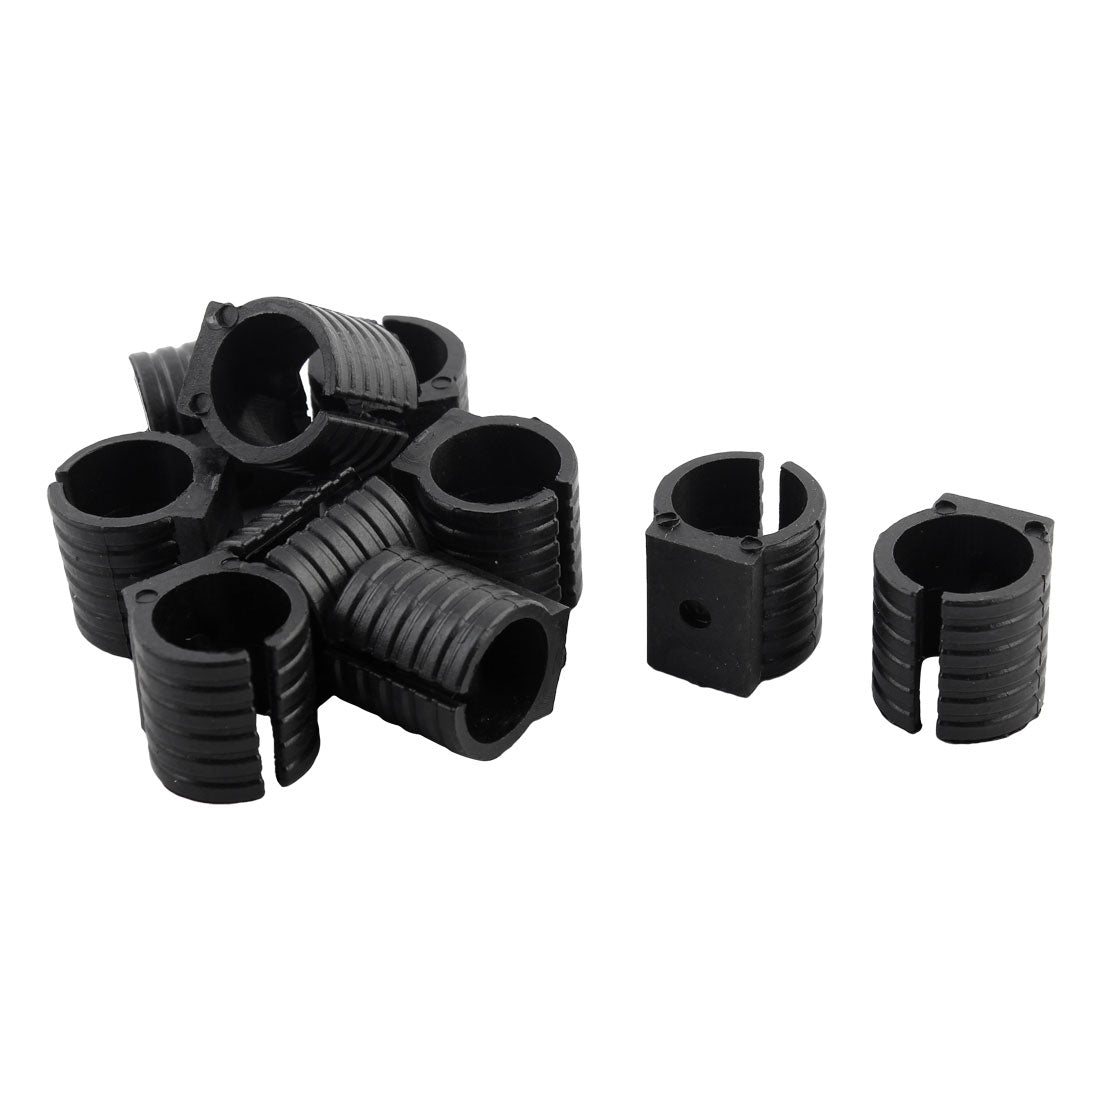 uxcell Uxcell Plastic U-Shaped Chair Pipe Foot Clamp Pads Floor Glides Caps Black 19mm Fit Dia 10pcs